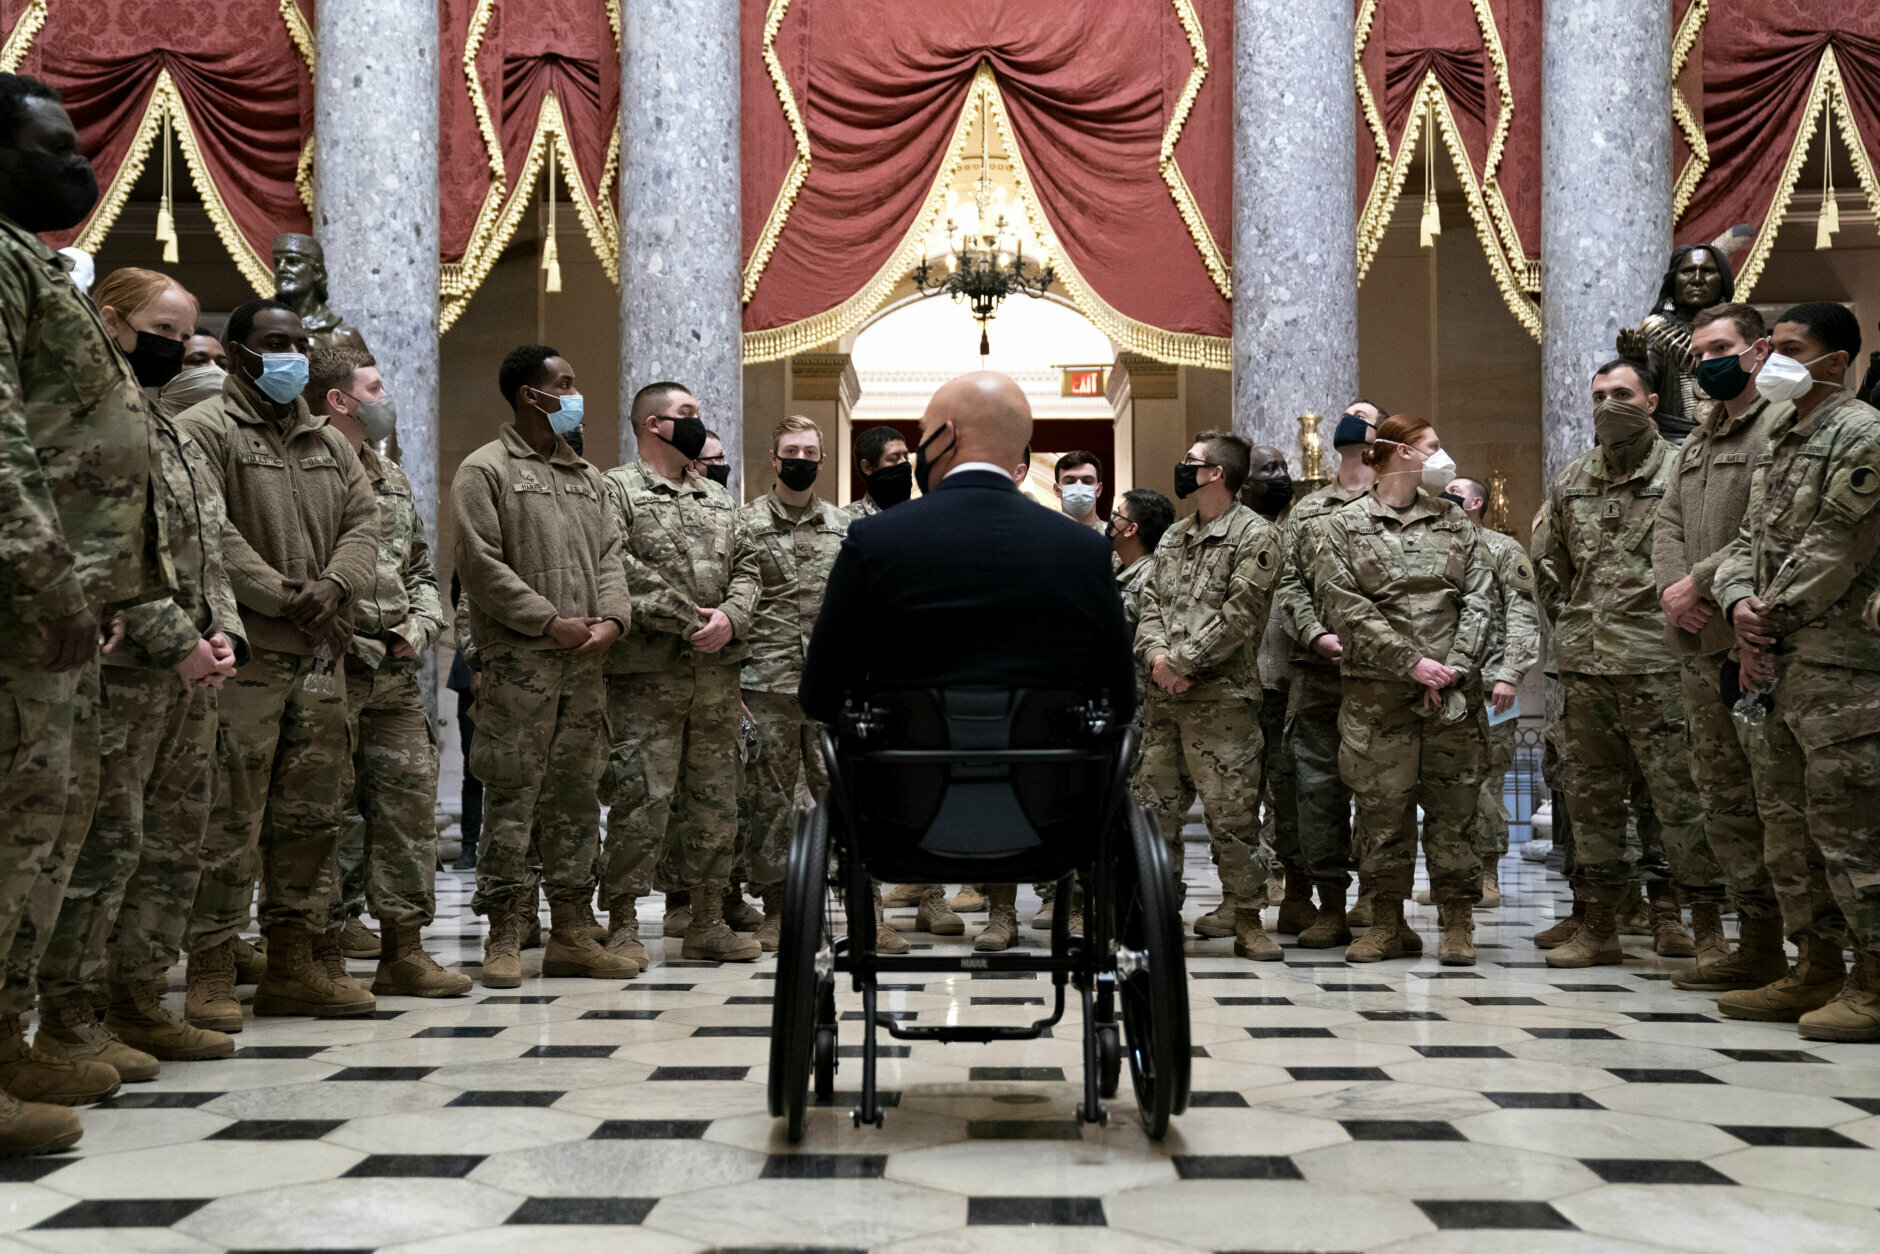 <p>Rep. Brian Mast (R-FL) gives members of the National Guard a tour of the U.S. Capitol on January 13, 2021 in Washington, DC.</p>
